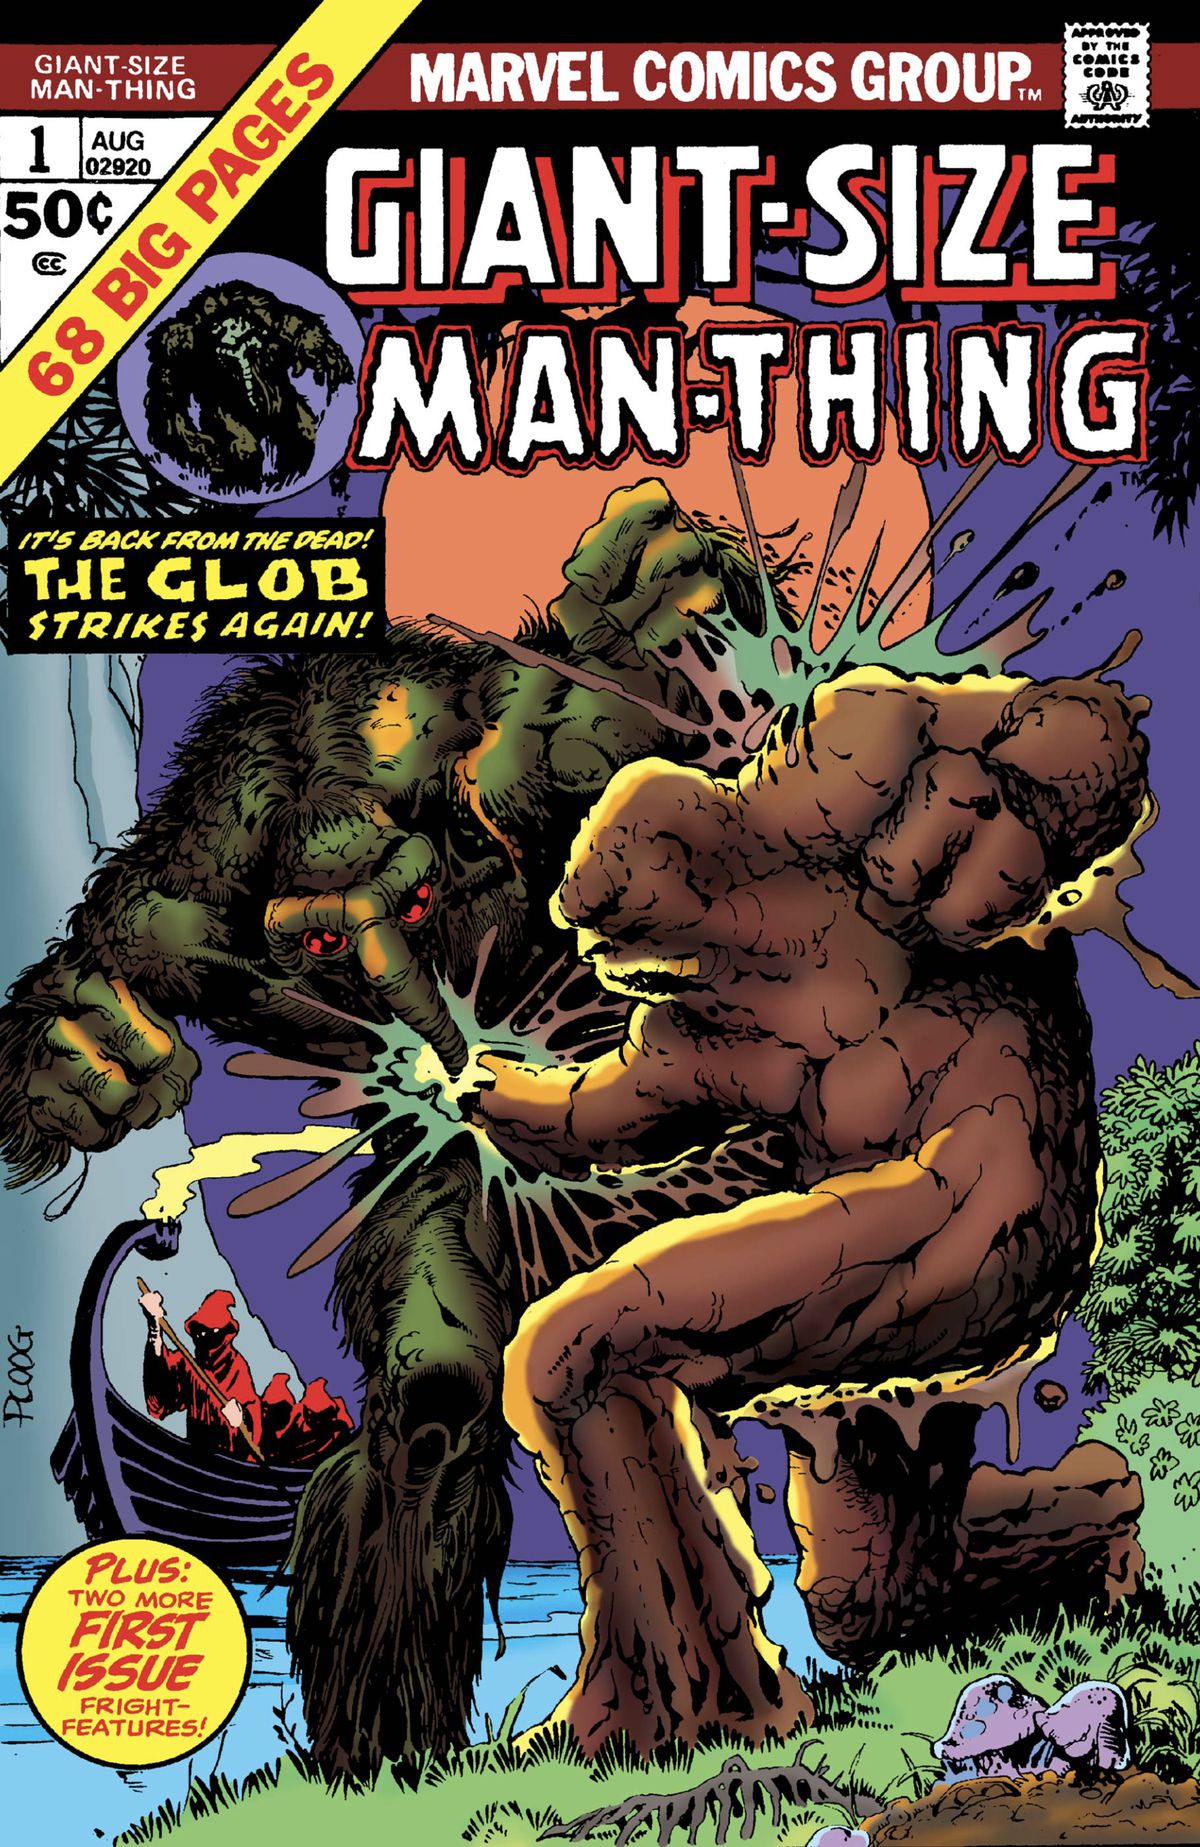 Man-Thing and the Glob battle it out in a swamp on the cover of the 68-page issue, Giant-Size Man-Thing #1 (1974).